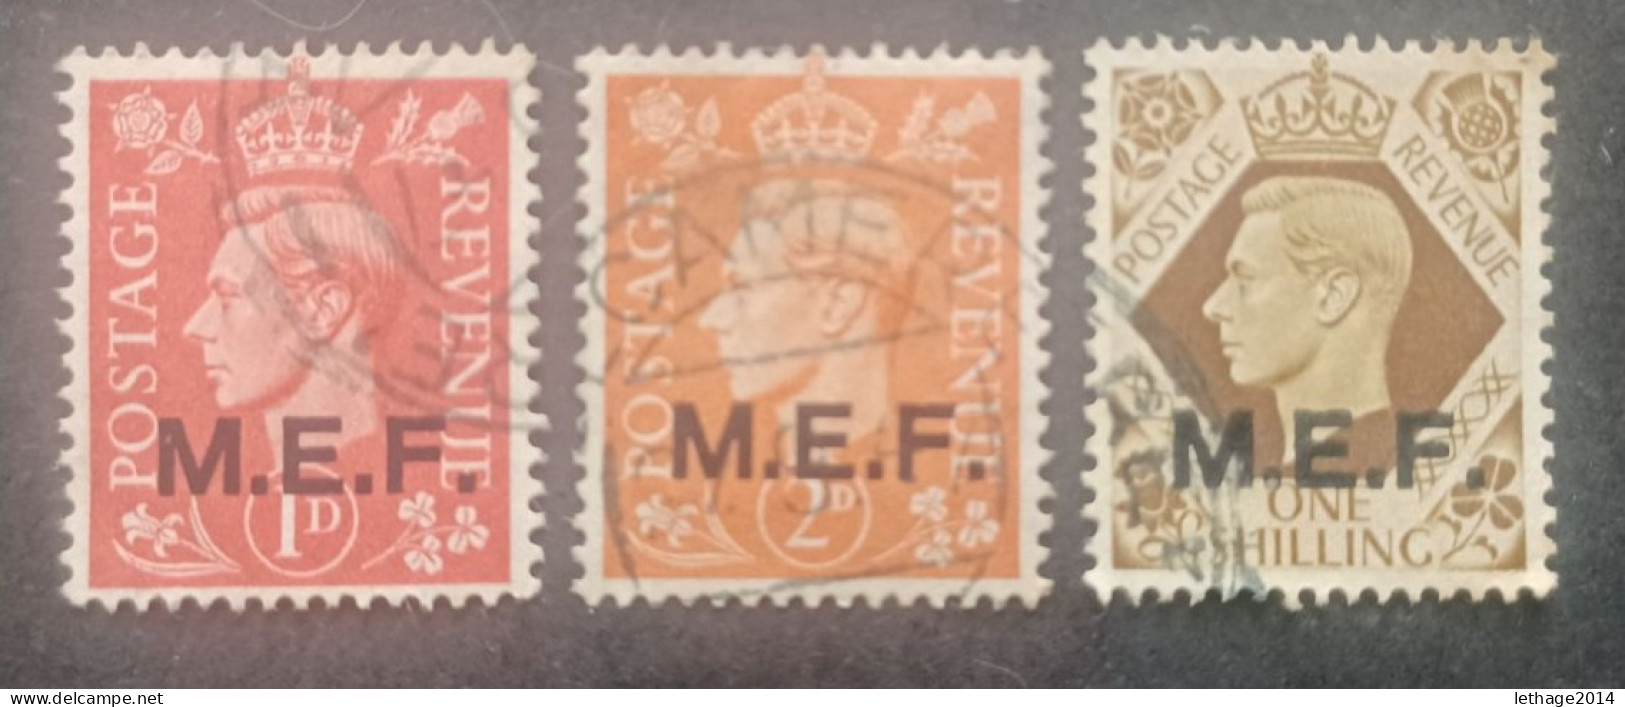 BRITISH OCCUPATION MIDDLE EAST FORCES MEF 1943 KING GEORGE VI LONDON ISSUE CAT SASS. N 6-7-13 - Occup. Britannica MEF